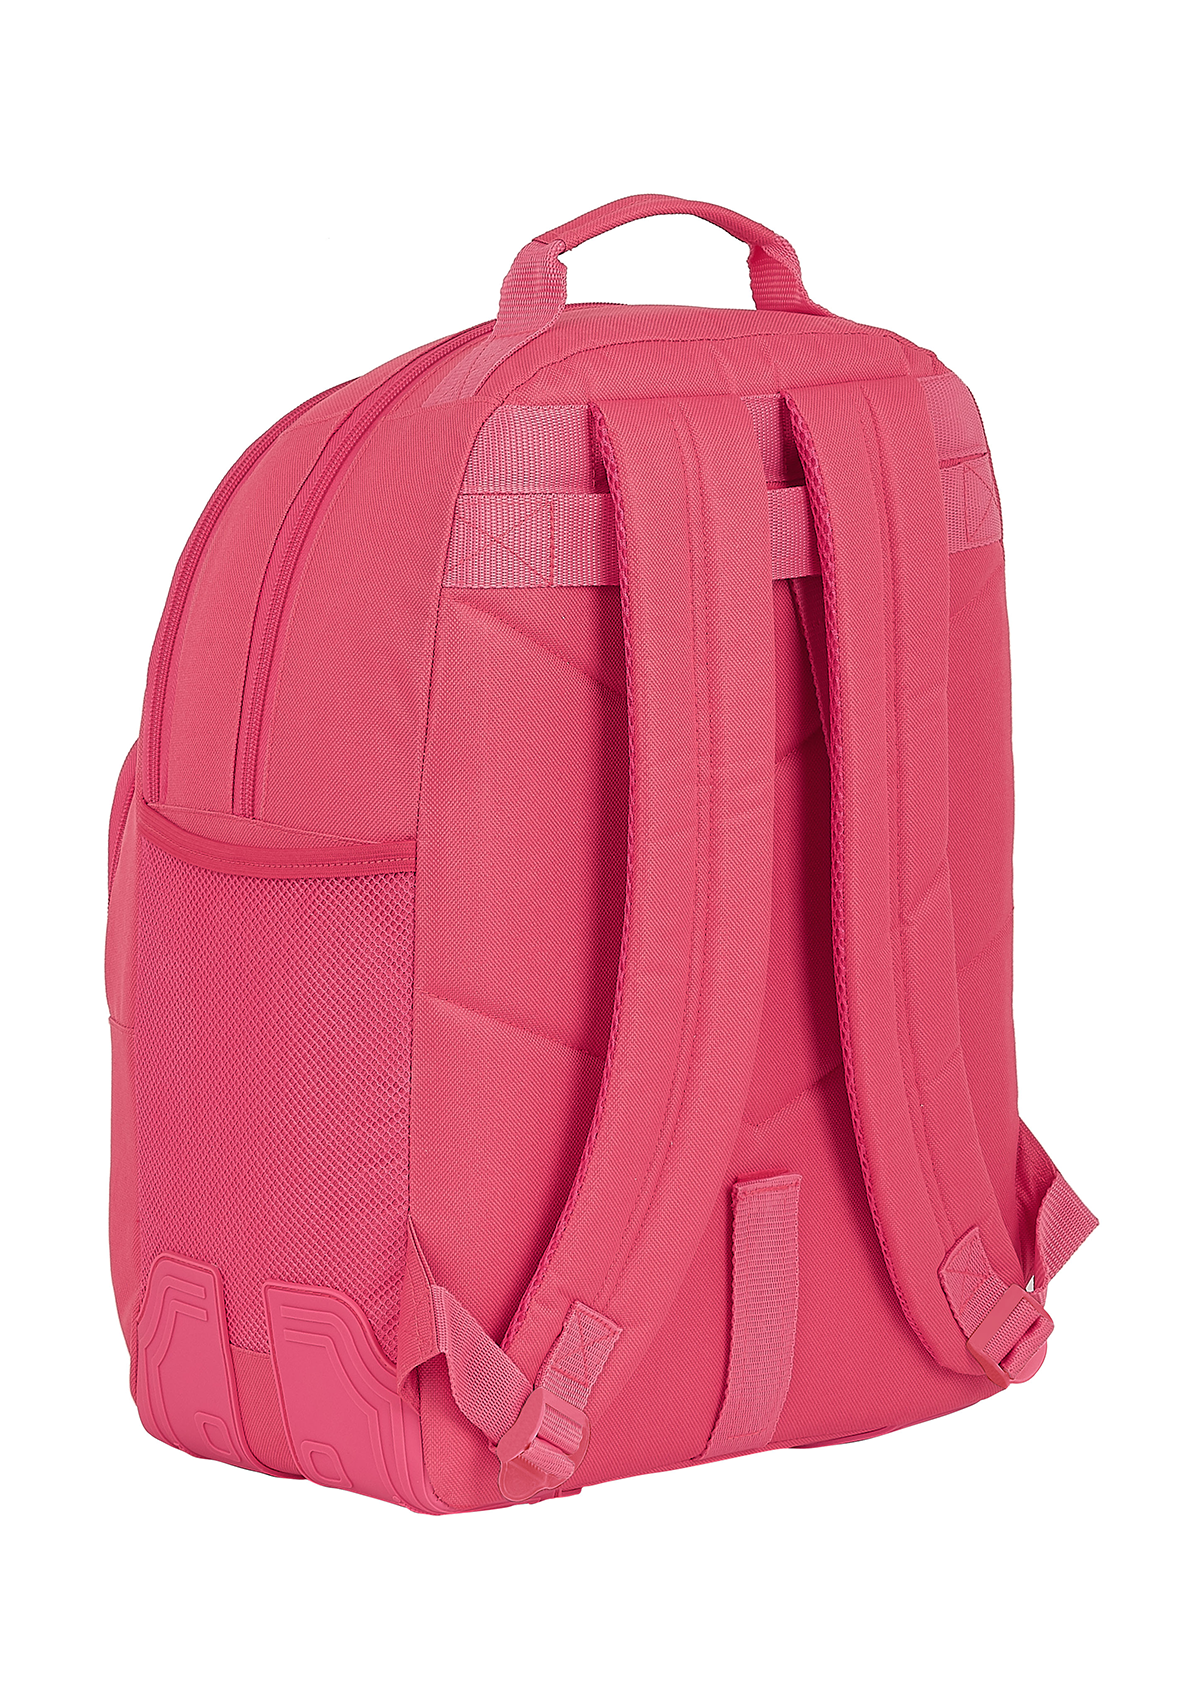 Blackfit8 Double Pink Large Backpack